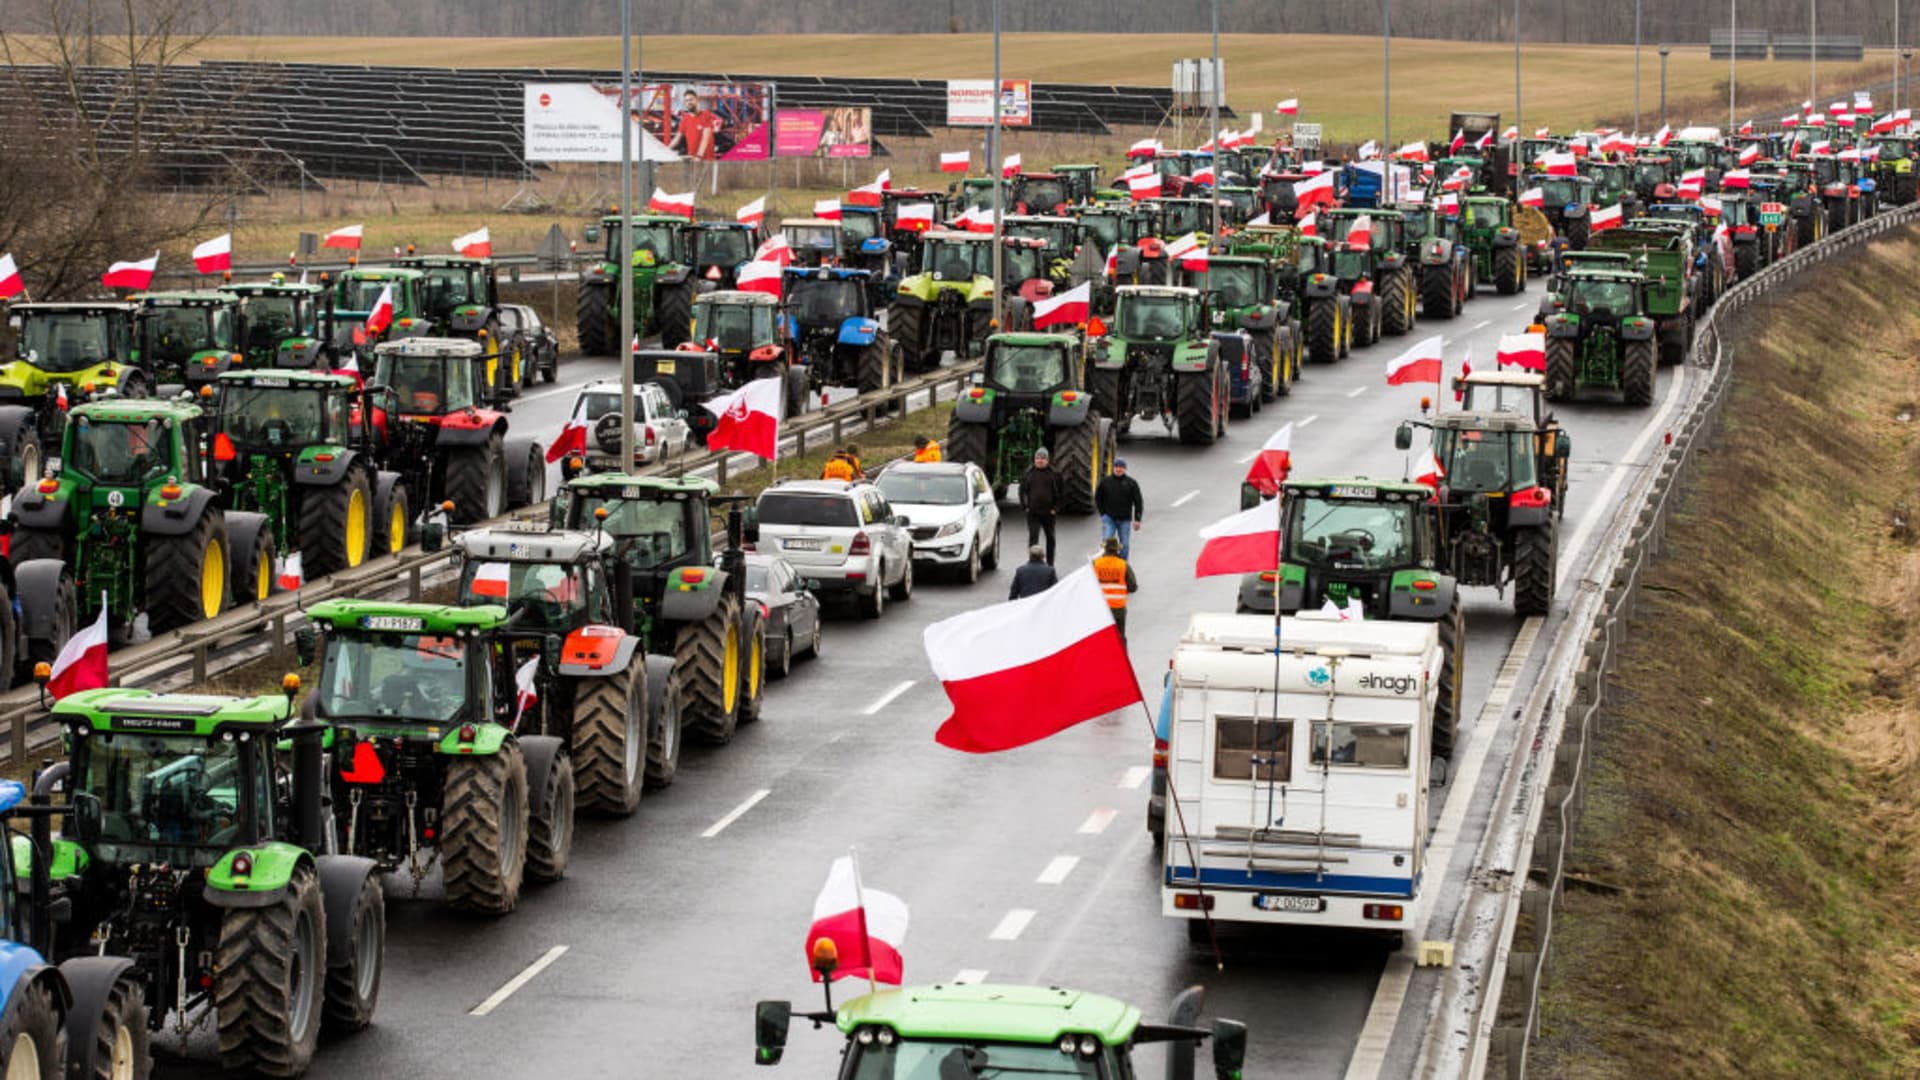 Polish farmers with their tractors and vehicles block the expressway S3 during a demonstration. Polish farmers are staging protests against cheap Ukrainian grain flooding the market and EU regulations on pesticide and fertiliser usage. Tractors with Polish flags blocked motorways and major junctions in almost 200 locations in Poland. 